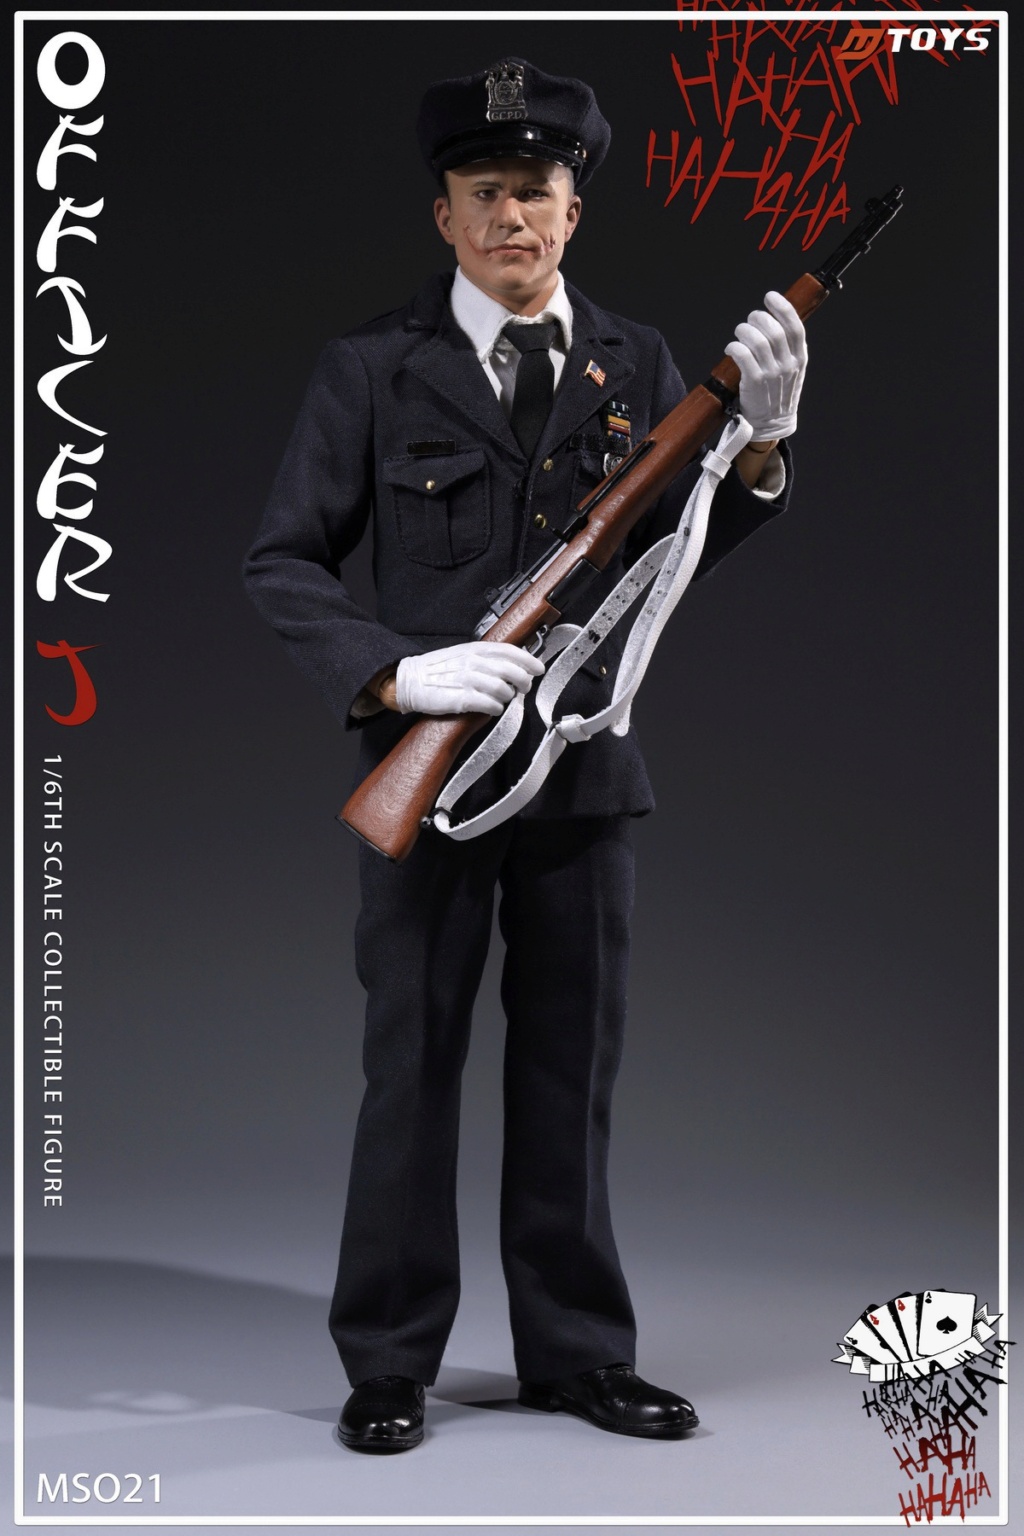 NEW PRODUCT: Mtoys: MS021 1/6 Scale Police Clown B4742e10